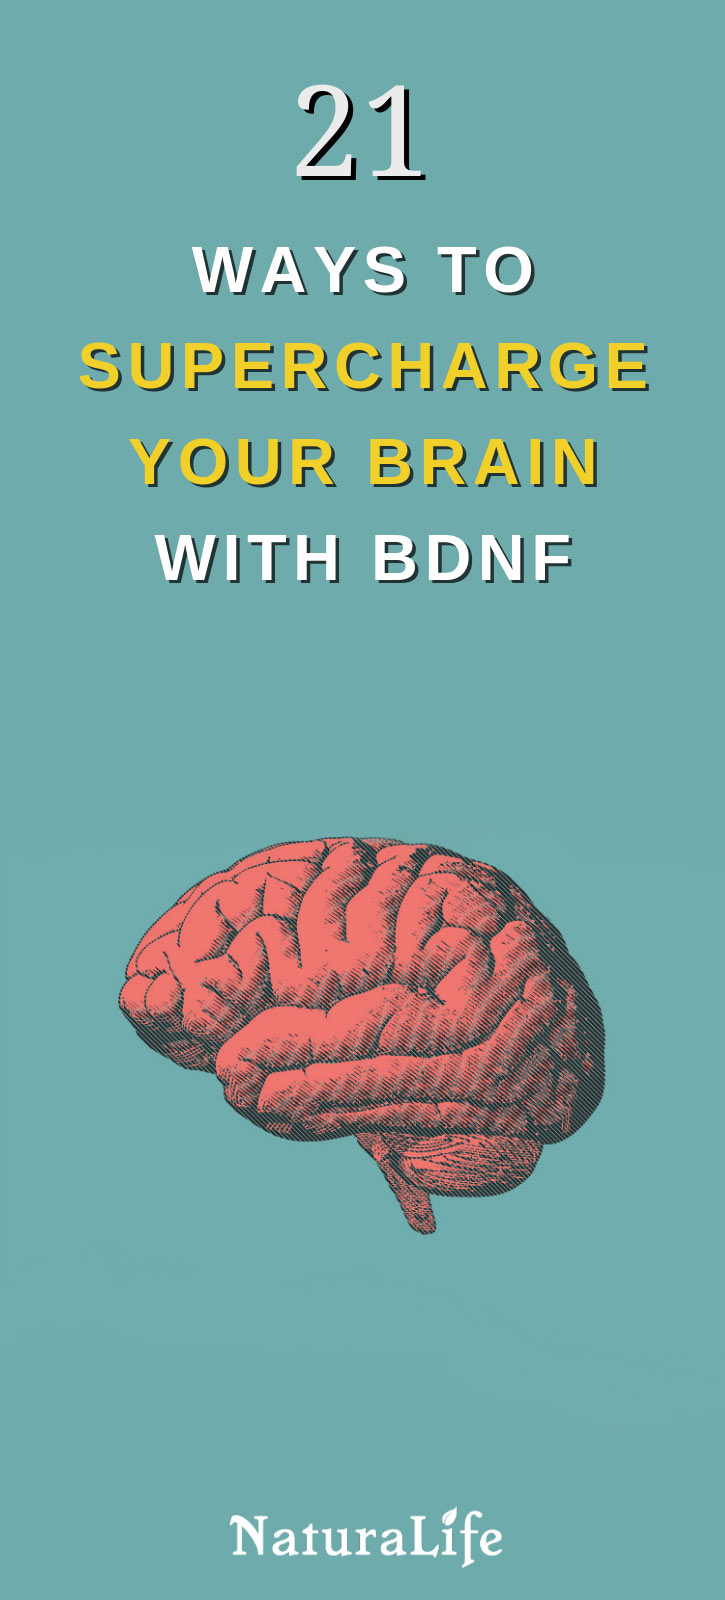 21 Ways to Increase BDNF for a Supercharged Brain